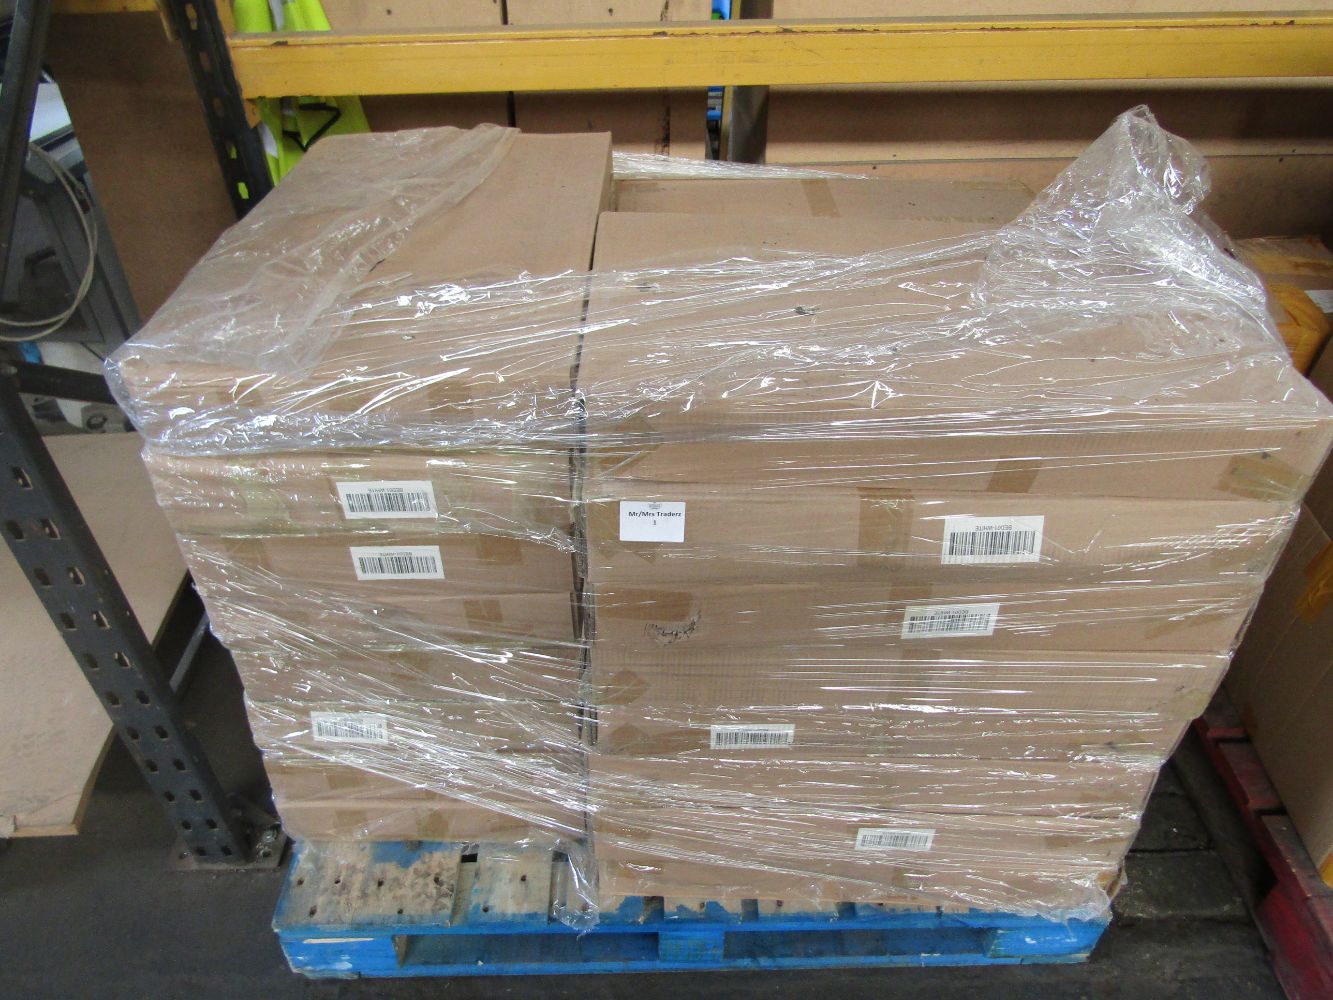 Huge Traders pallets of online customer returns, warehouse clearance stock and clothing pallets